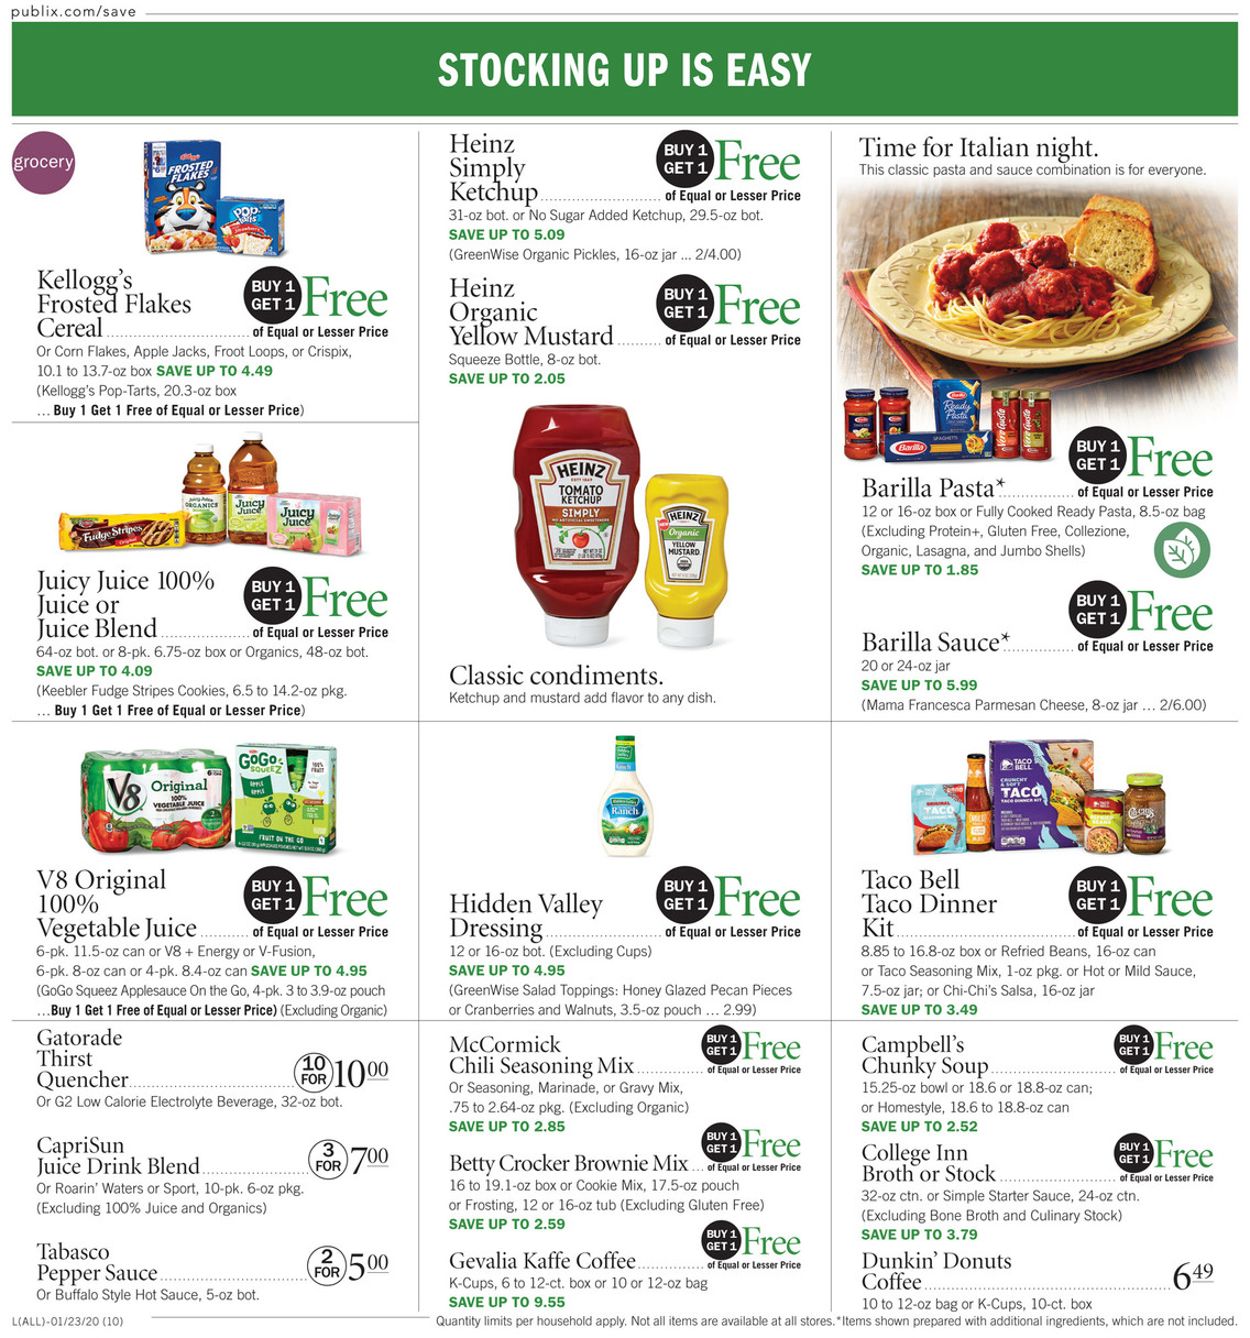 Publix Ad from 01/23/2020